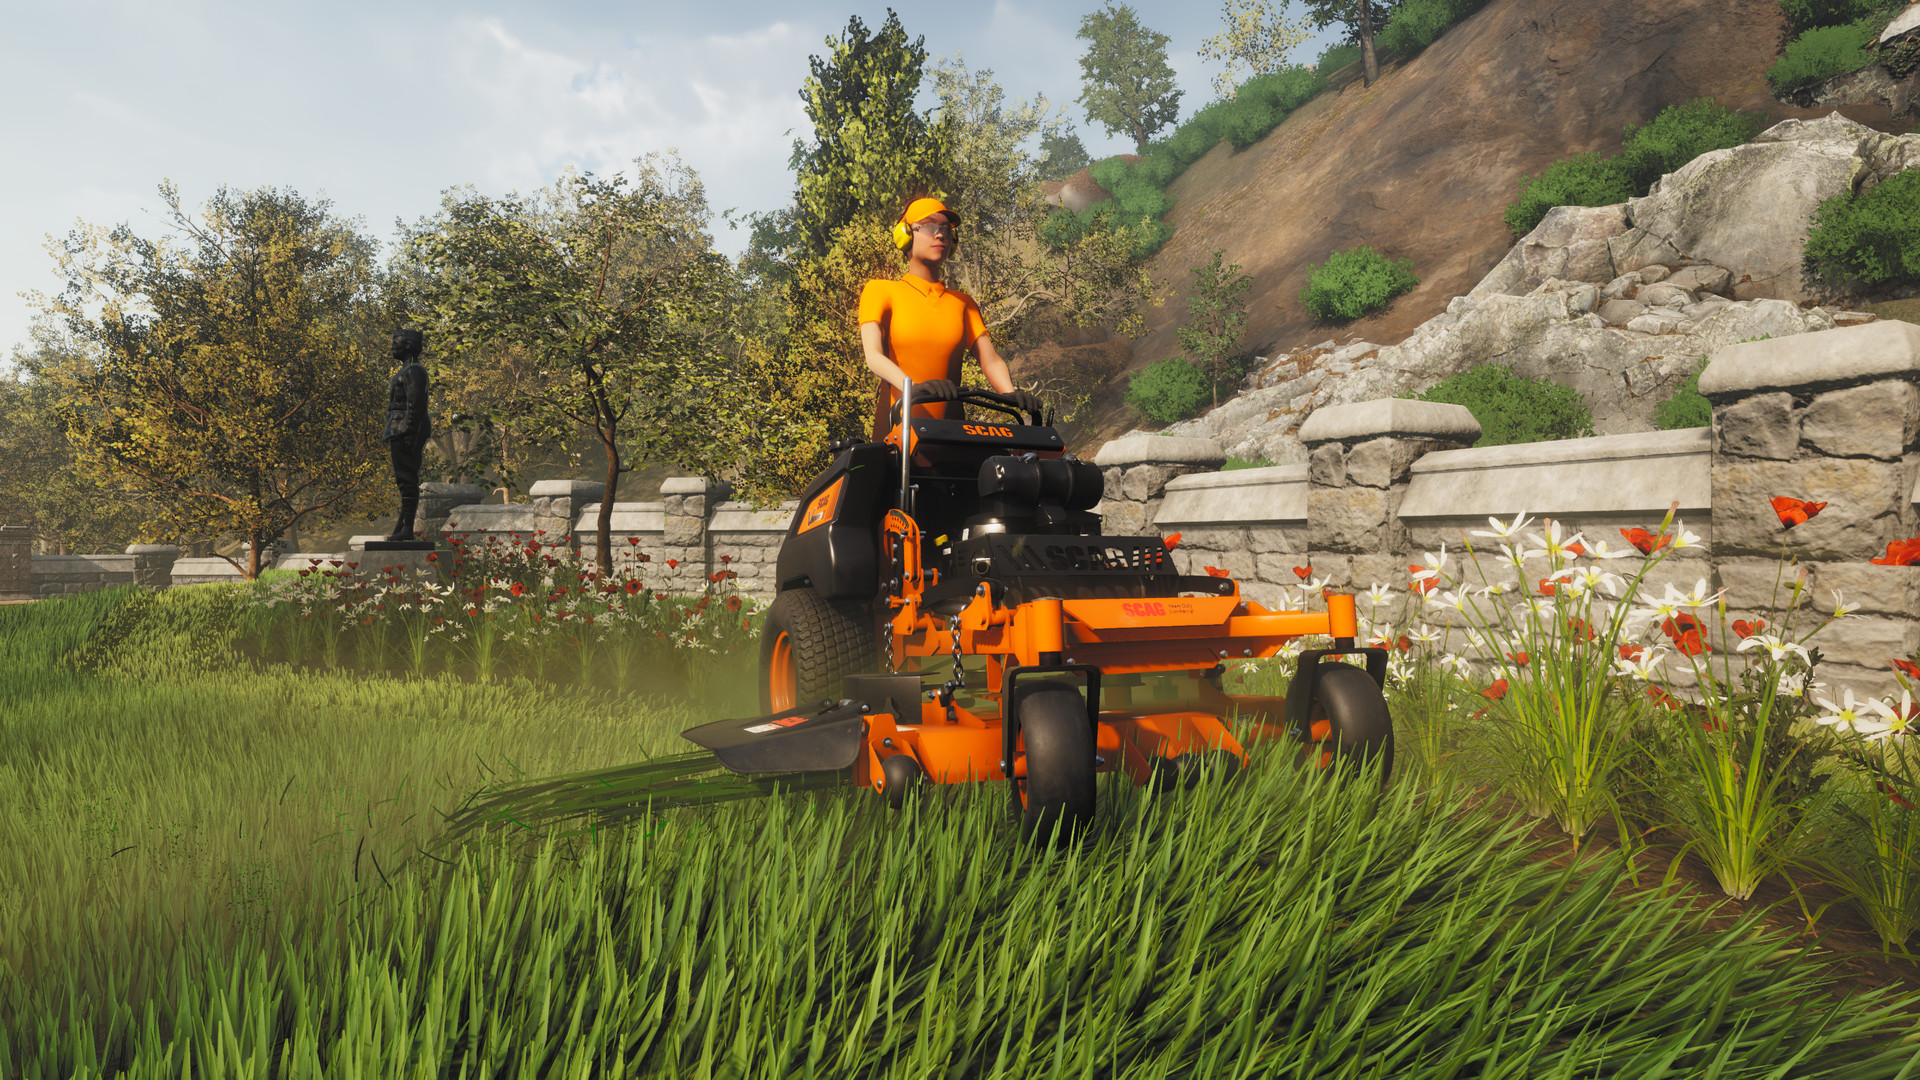 Lawn Mowing Simulator on Steam | PS5-Spiele